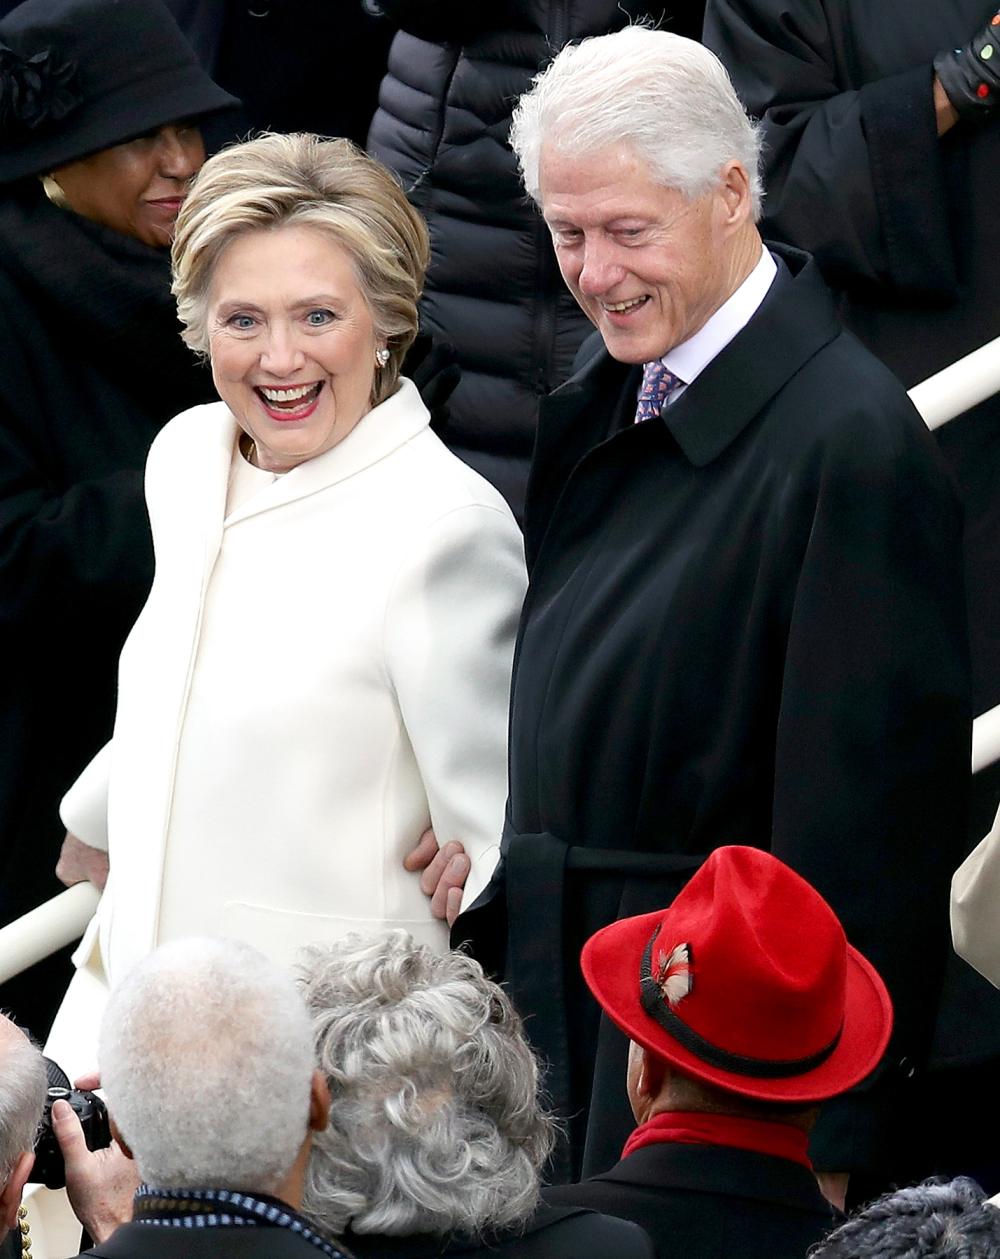 Hillary Clinton and Bill Clinton arrive on the West Front of the U.S. Capitol on January 20, 2017 in Washington, DC.